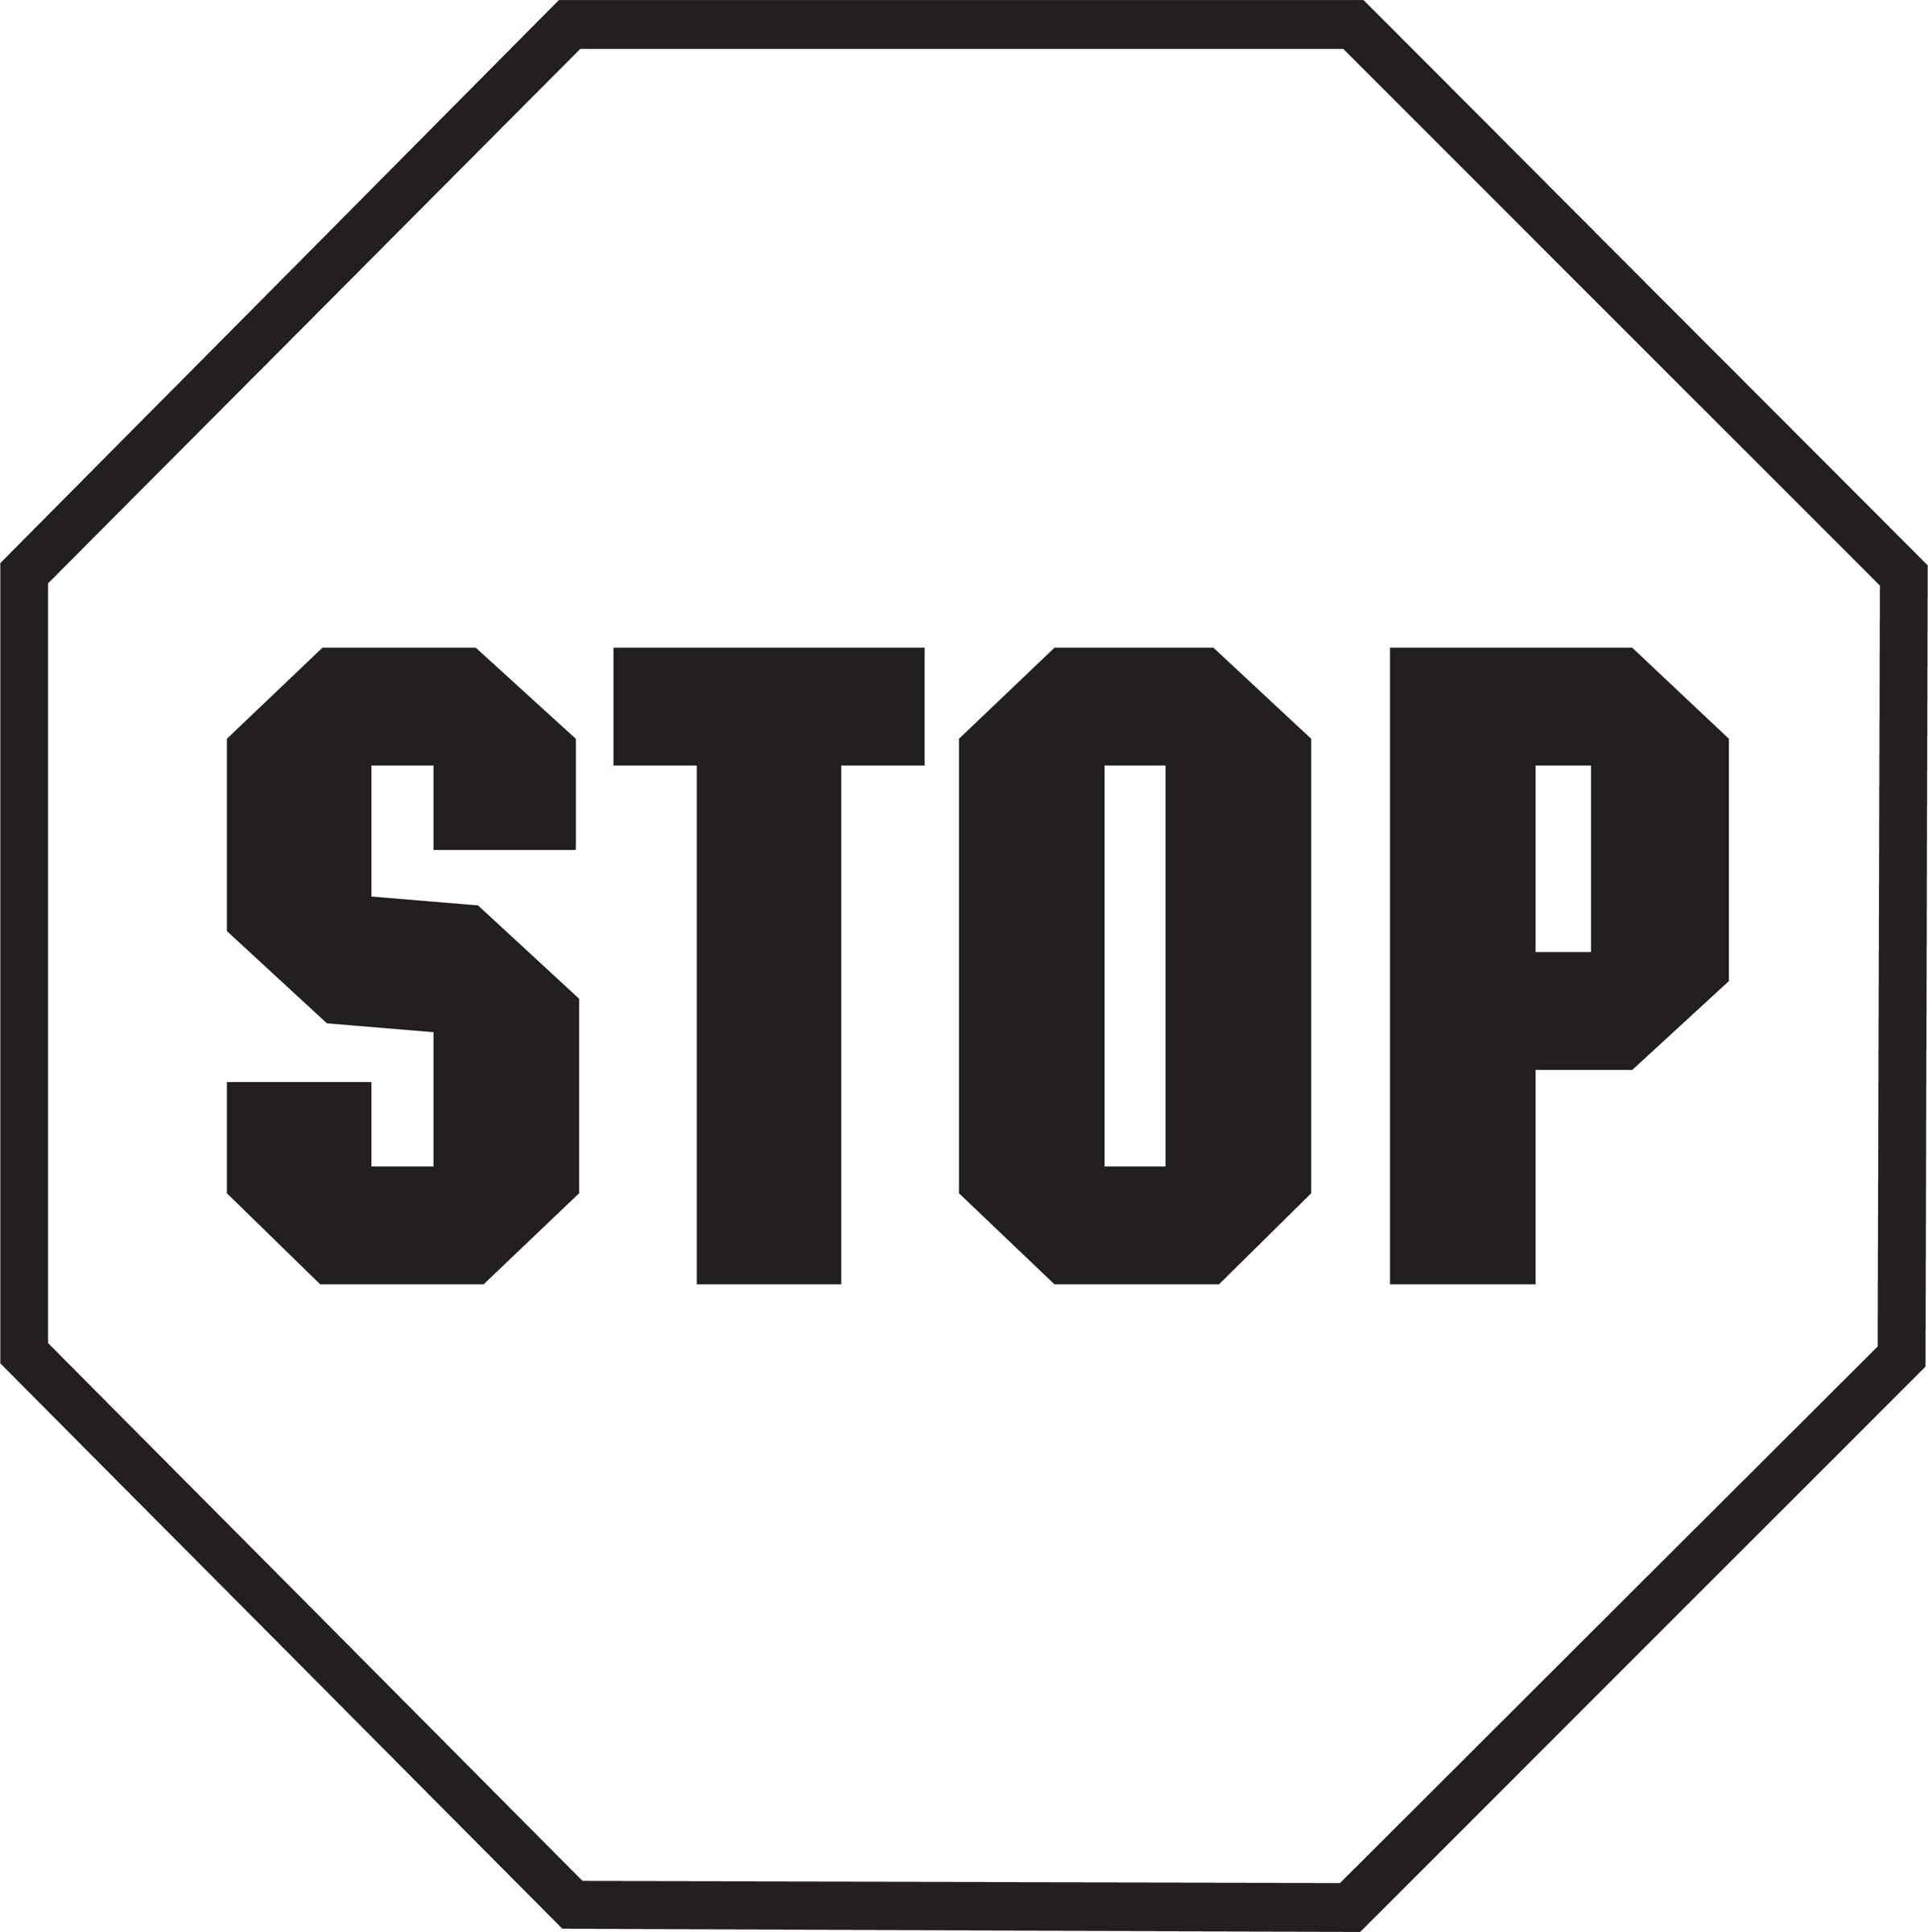 Best Photos of Stop Sign Template - Blank Stop Sign Template ...